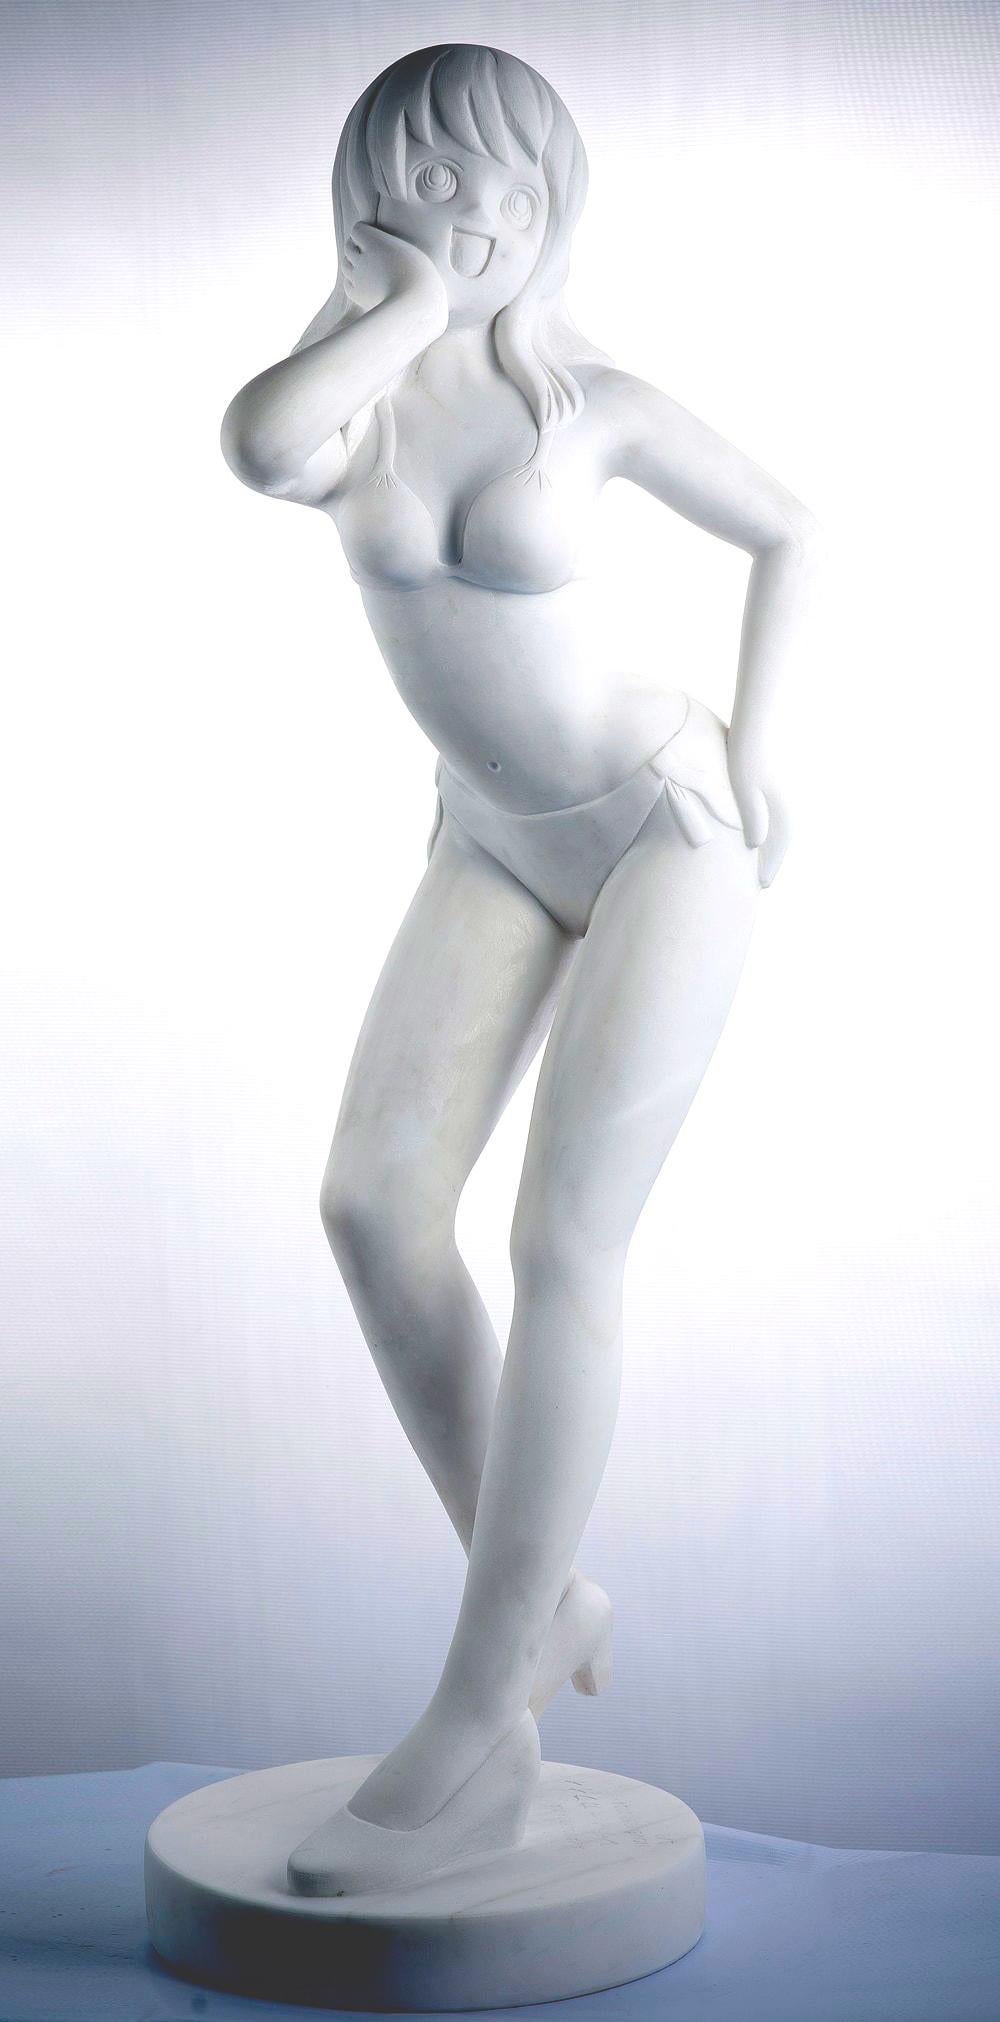 Shuya 5 : Ethereal Temptations and Sculpted Desires - Contemporary Sculpture by AYA TOSHIKAWA